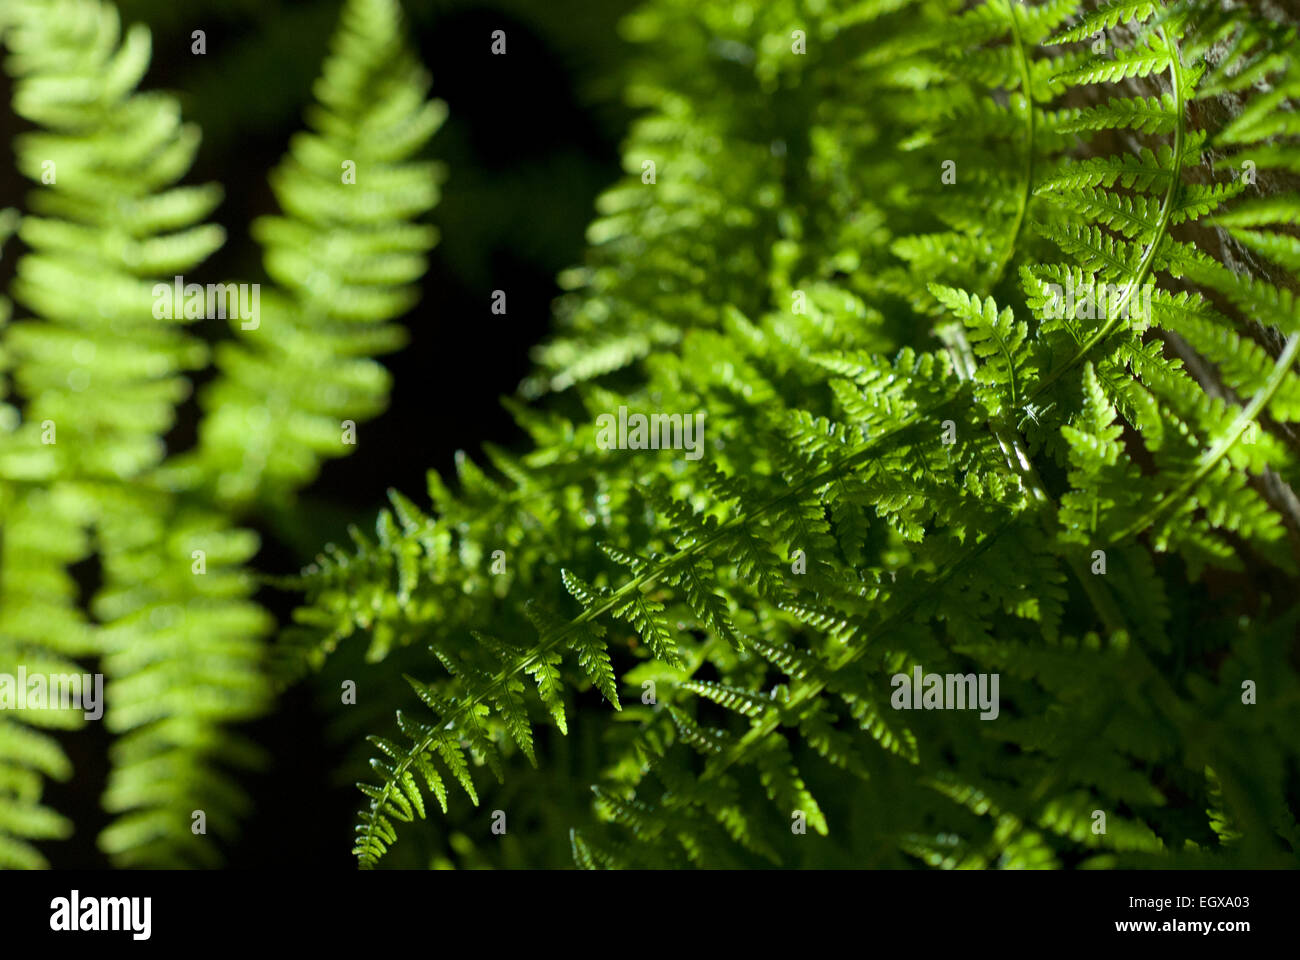 Green Fern leaf with dark background Patterns Nature. Black and Green Stock Photo